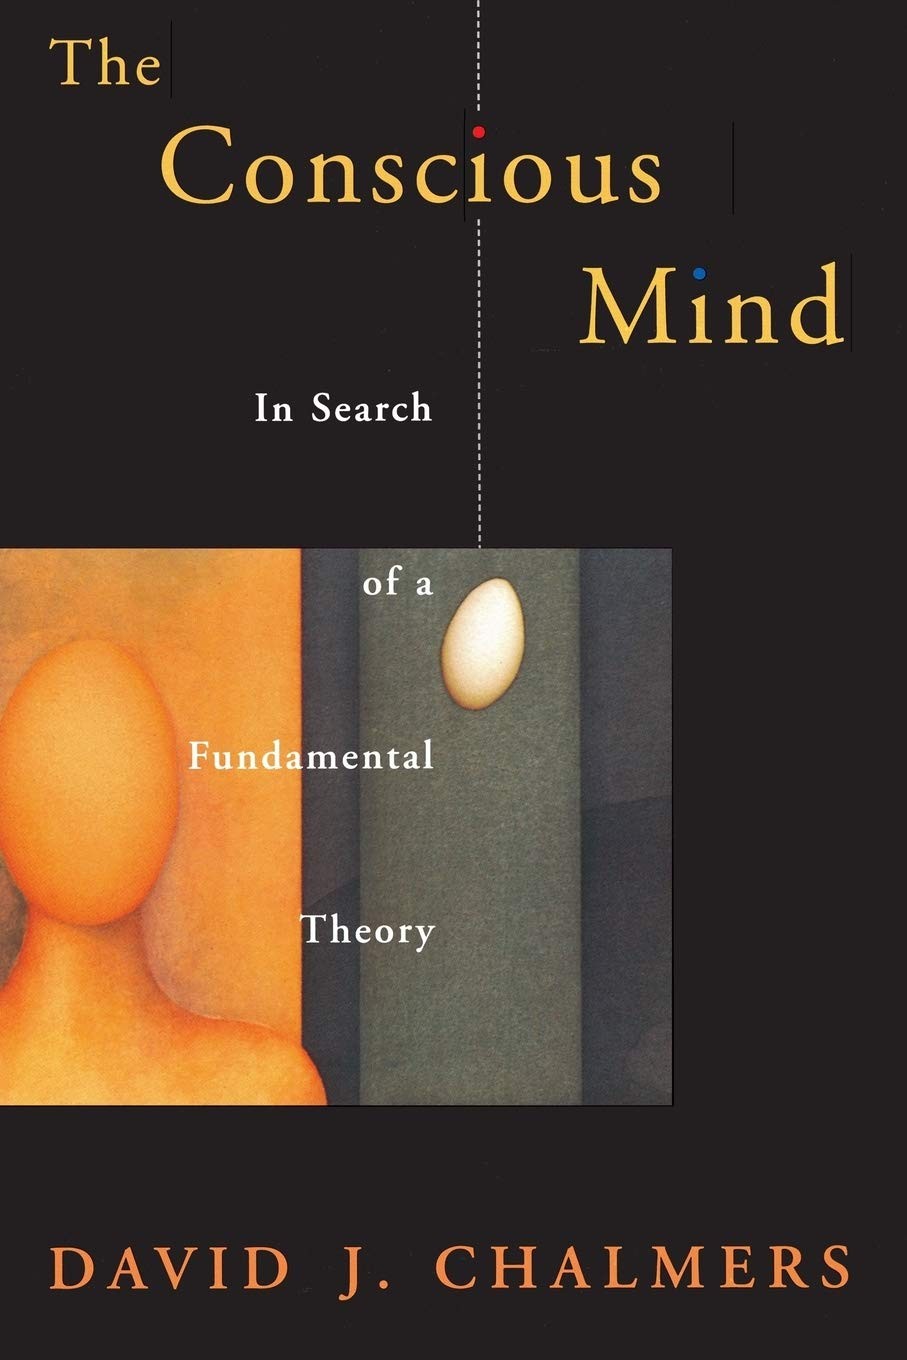 The Conscious Mind:In Search of a Fundamental Theory: In Search of a Fundamental Theory